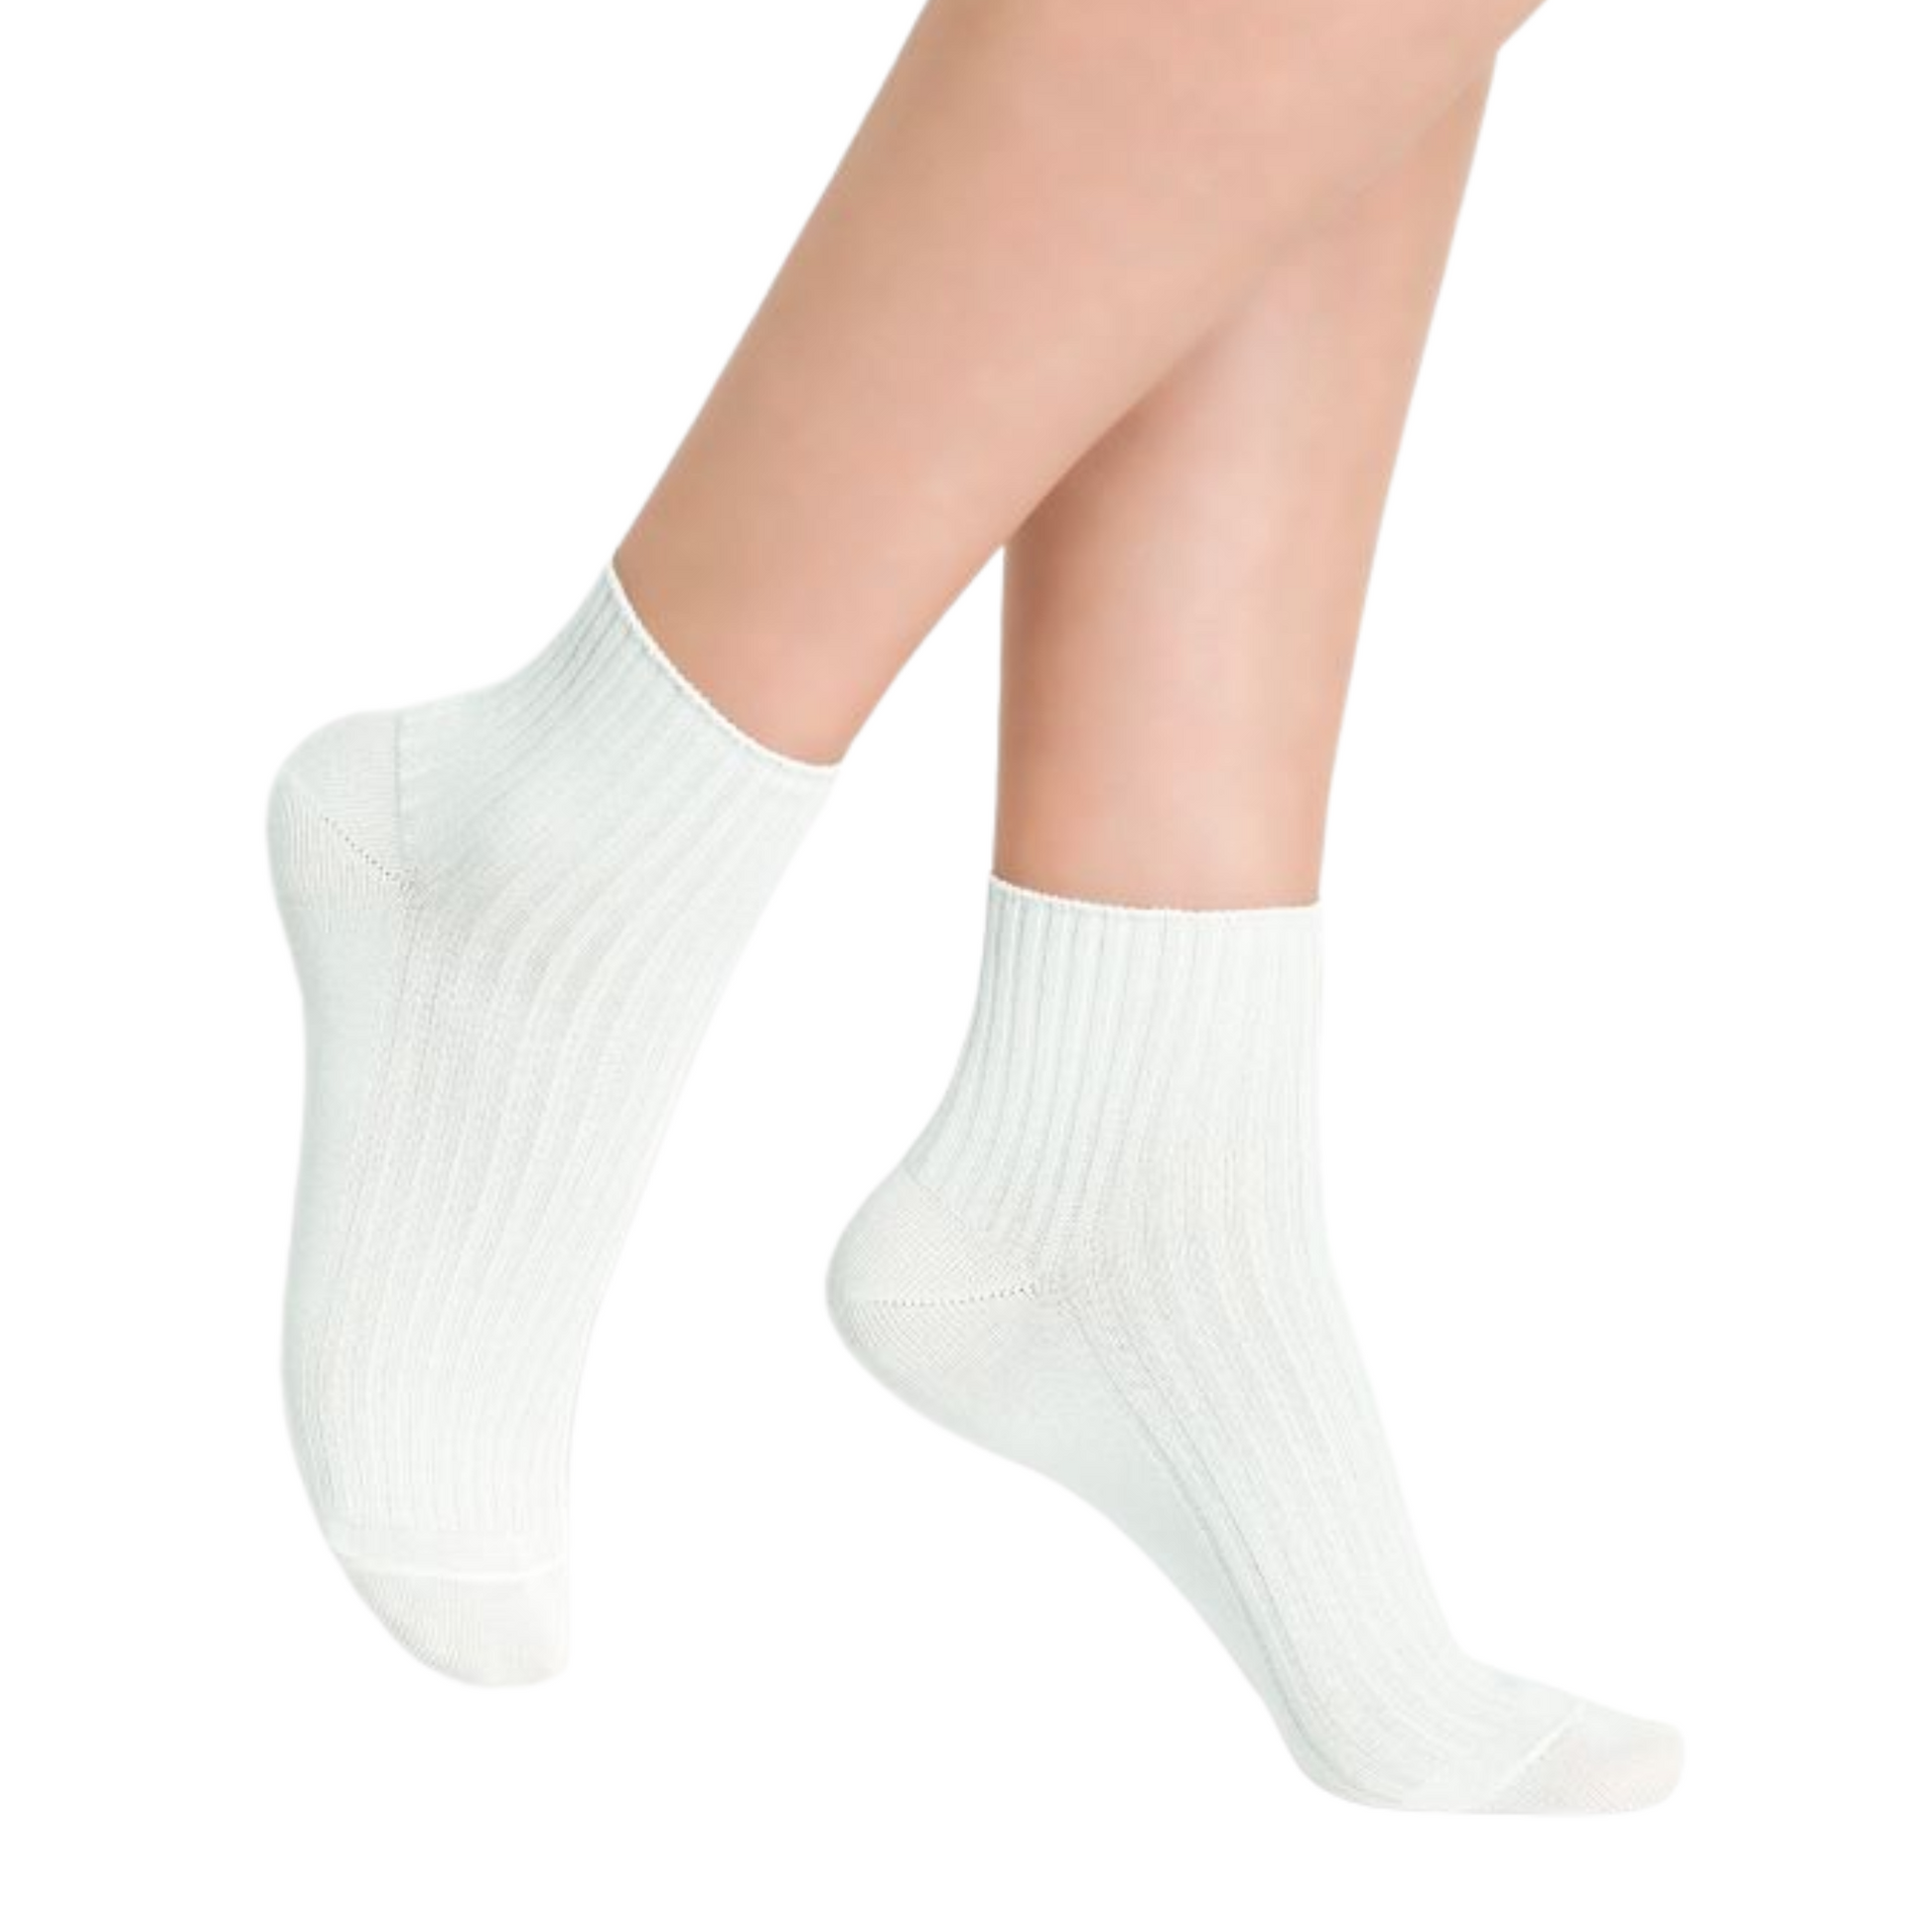 A pair of white ankle height socks is pictured with ribbed detailing.